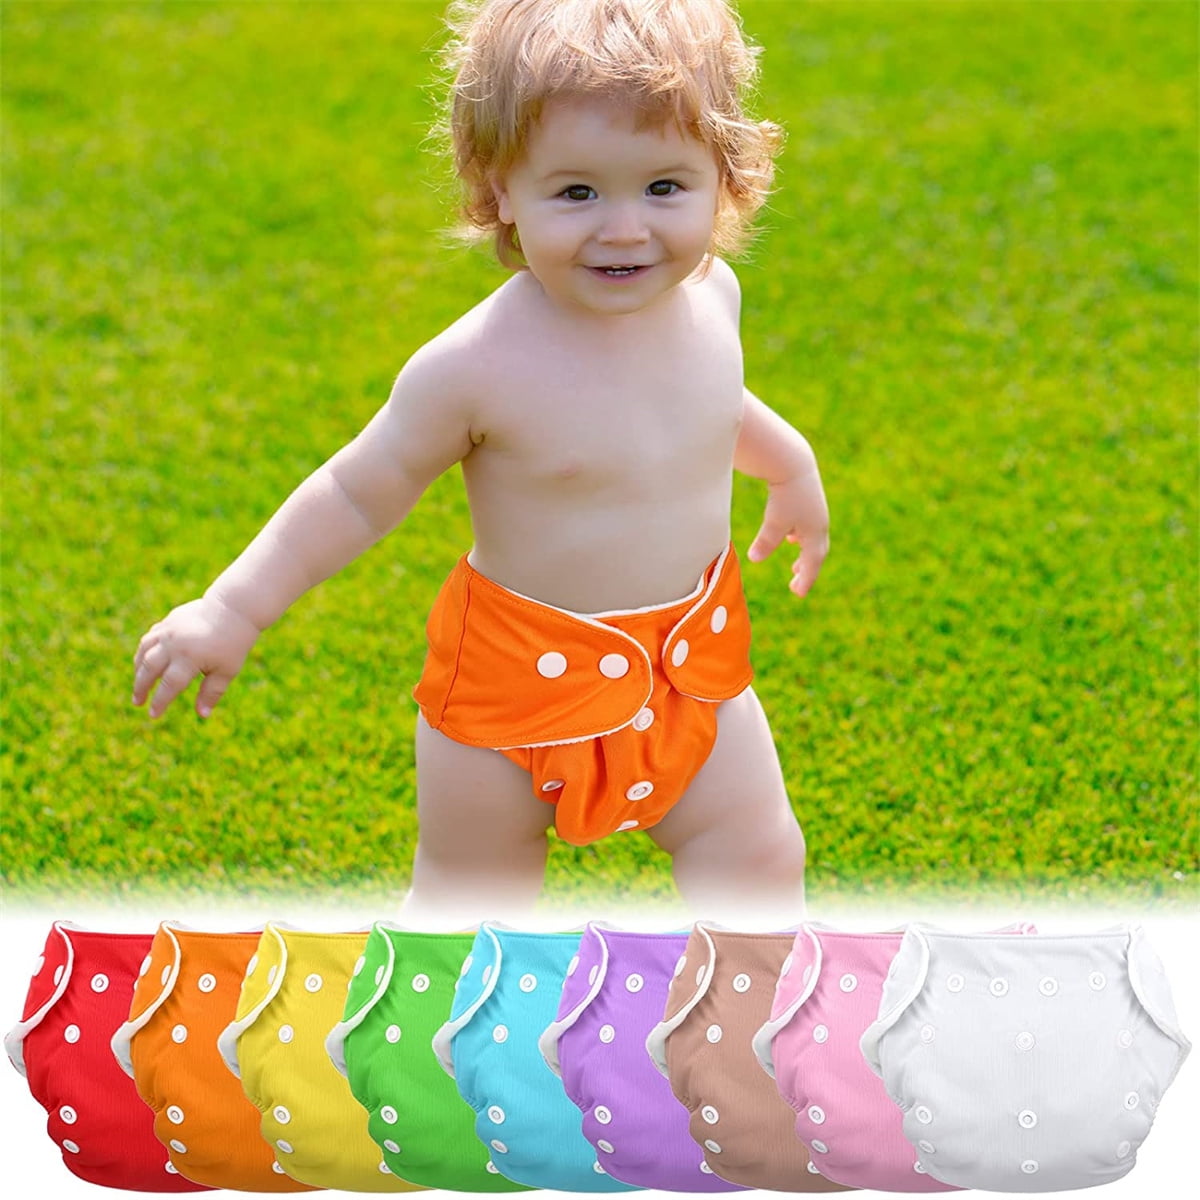 Casewin 8 Pcs Baby Cloth Diapers Adjustable Reusable Cloth Diapers One Size  Washable Nappy Covers Baby Cloth Pocket for Newborn Toddlers Boys Girls